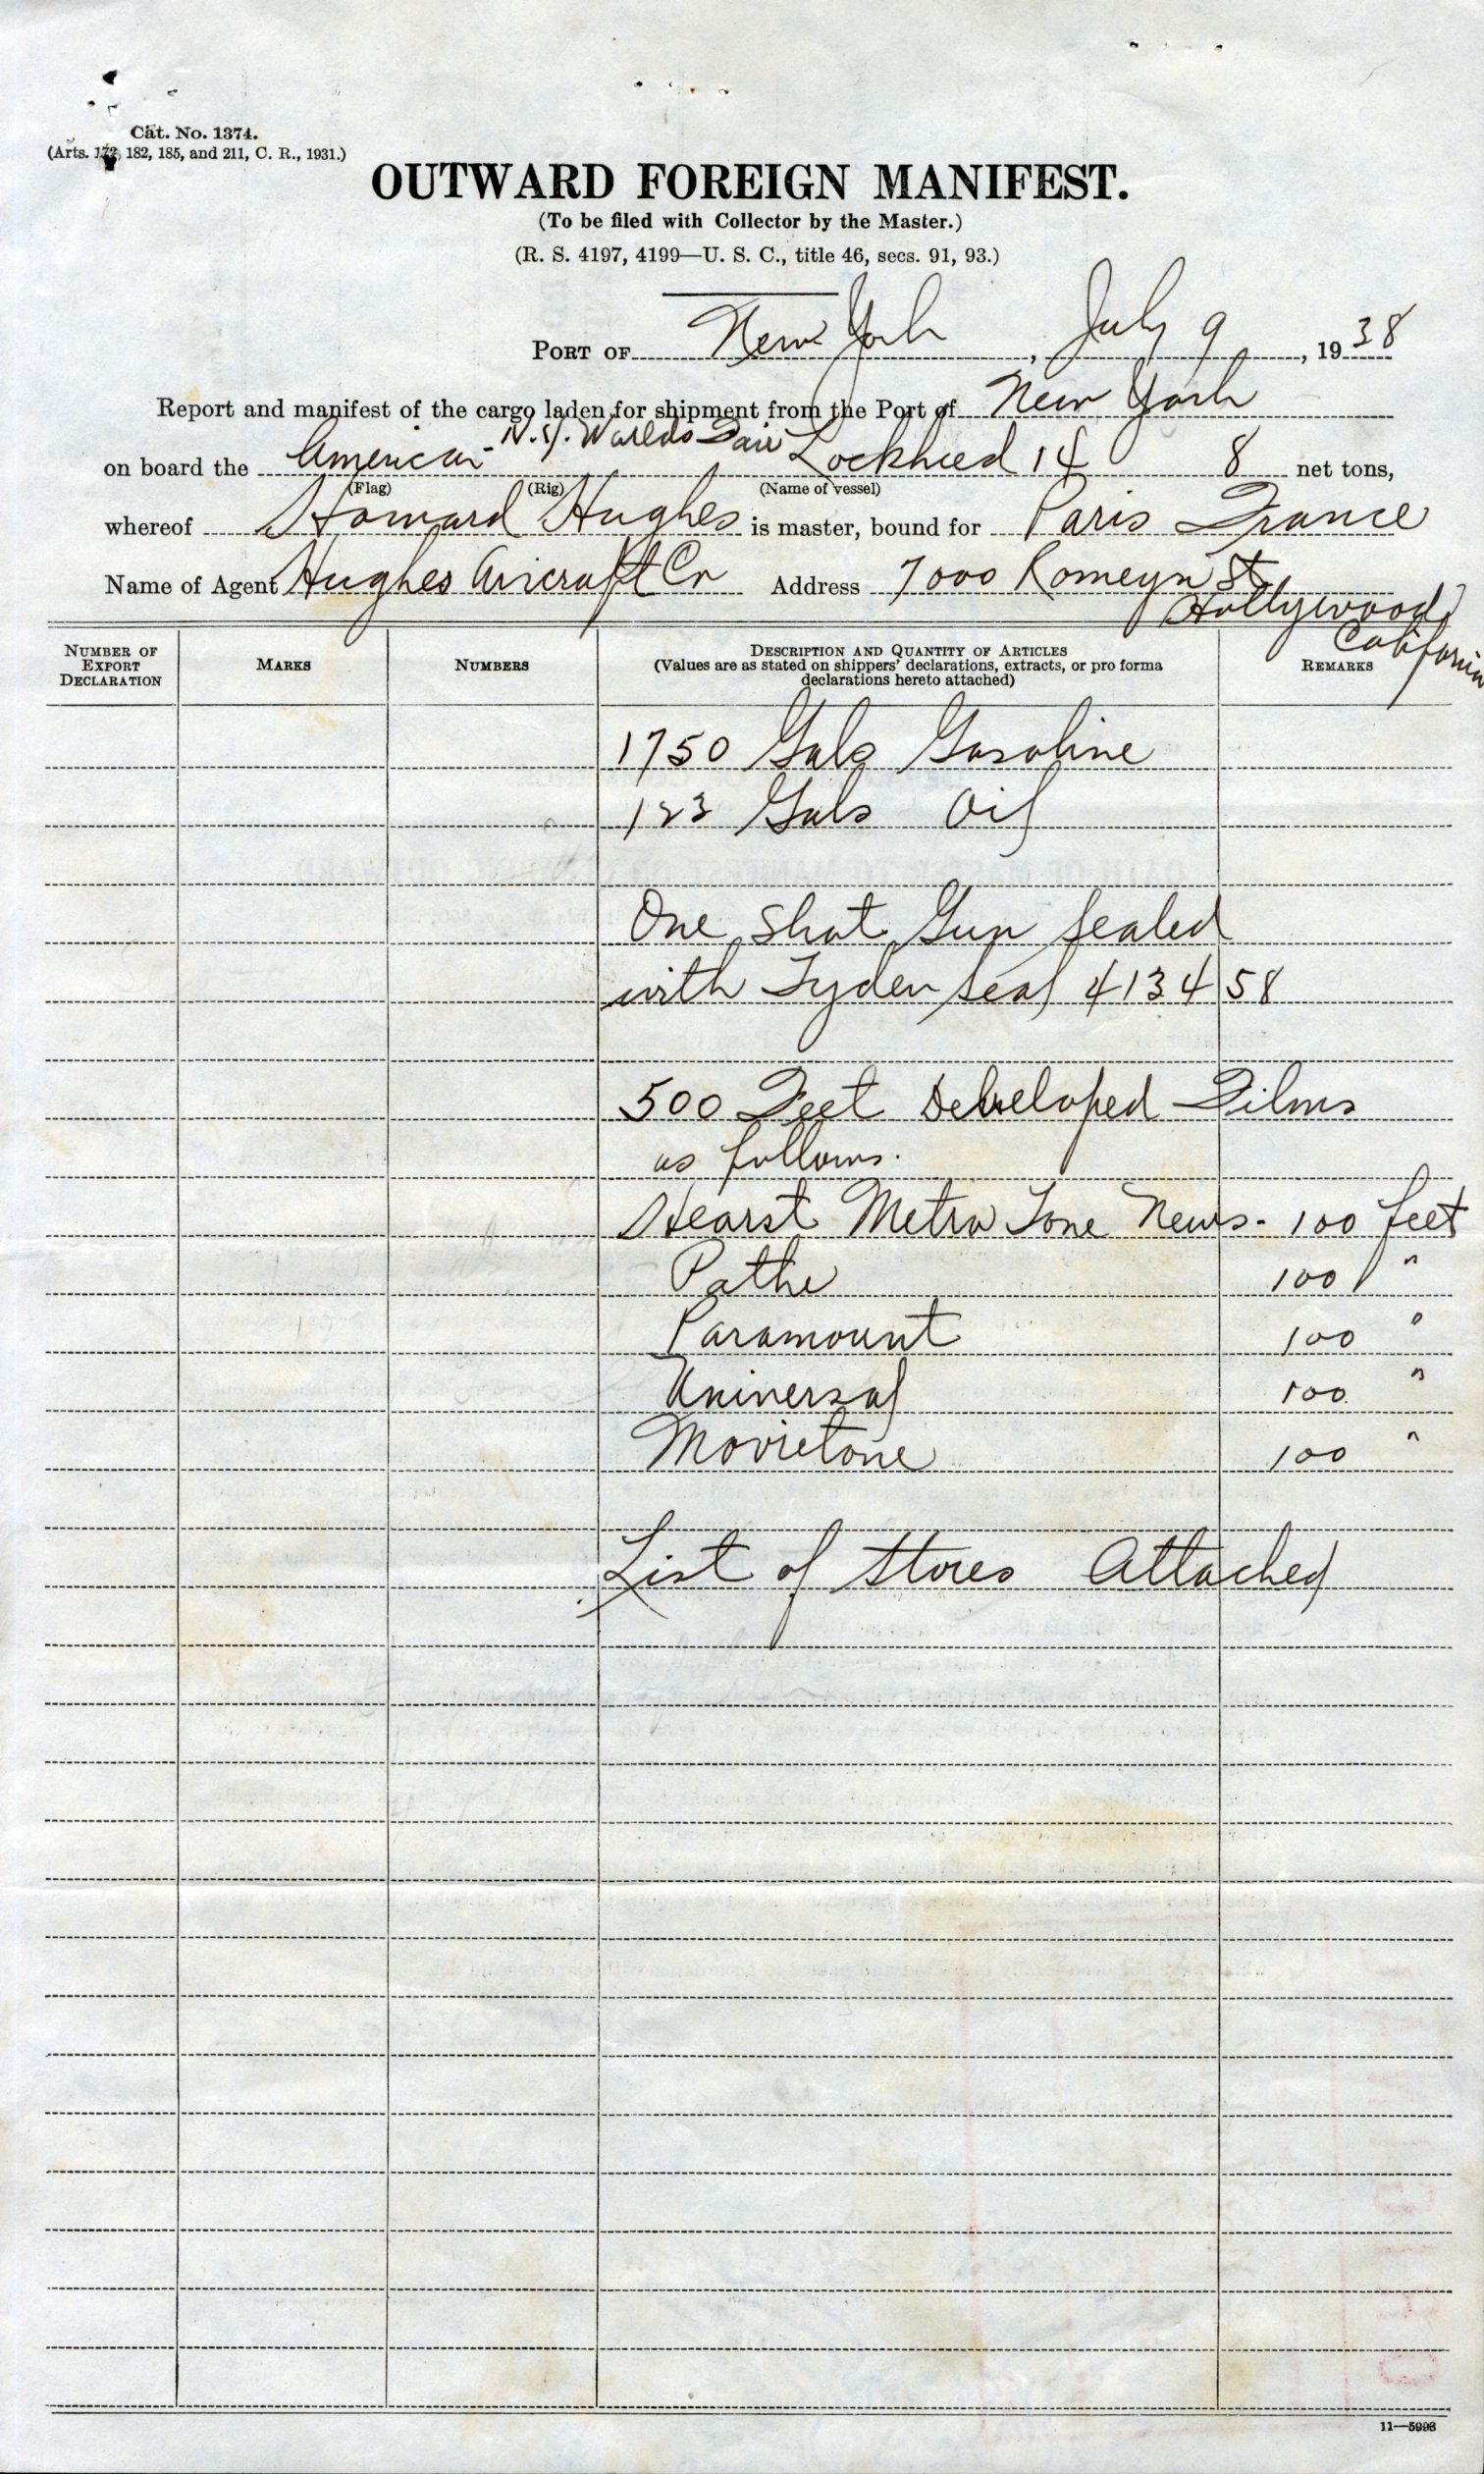 The "List of Stores" is not attached to the Hughes manifest, but we can speculate on what he carried based on his advance requests for the landing sites. Detailed in his flight operations manual, at Paris, Hughes asked for "15 gallons of Poland water in one or one half gallon bottles with unbroken seals, 12 quarts of pasteurized milk in one quart sealed bottles, 3 lbs. of fried chicken, 15 lbs. of dry ice, 5 gallons of hot coffee, ready to be poured in ship's thermos bottles, 5 hot dinners, individually packed, consisting of lamb chops, baked potatoes, and fresh string beans, and a container of coffee" along with oil, gasoline, and spare parts.